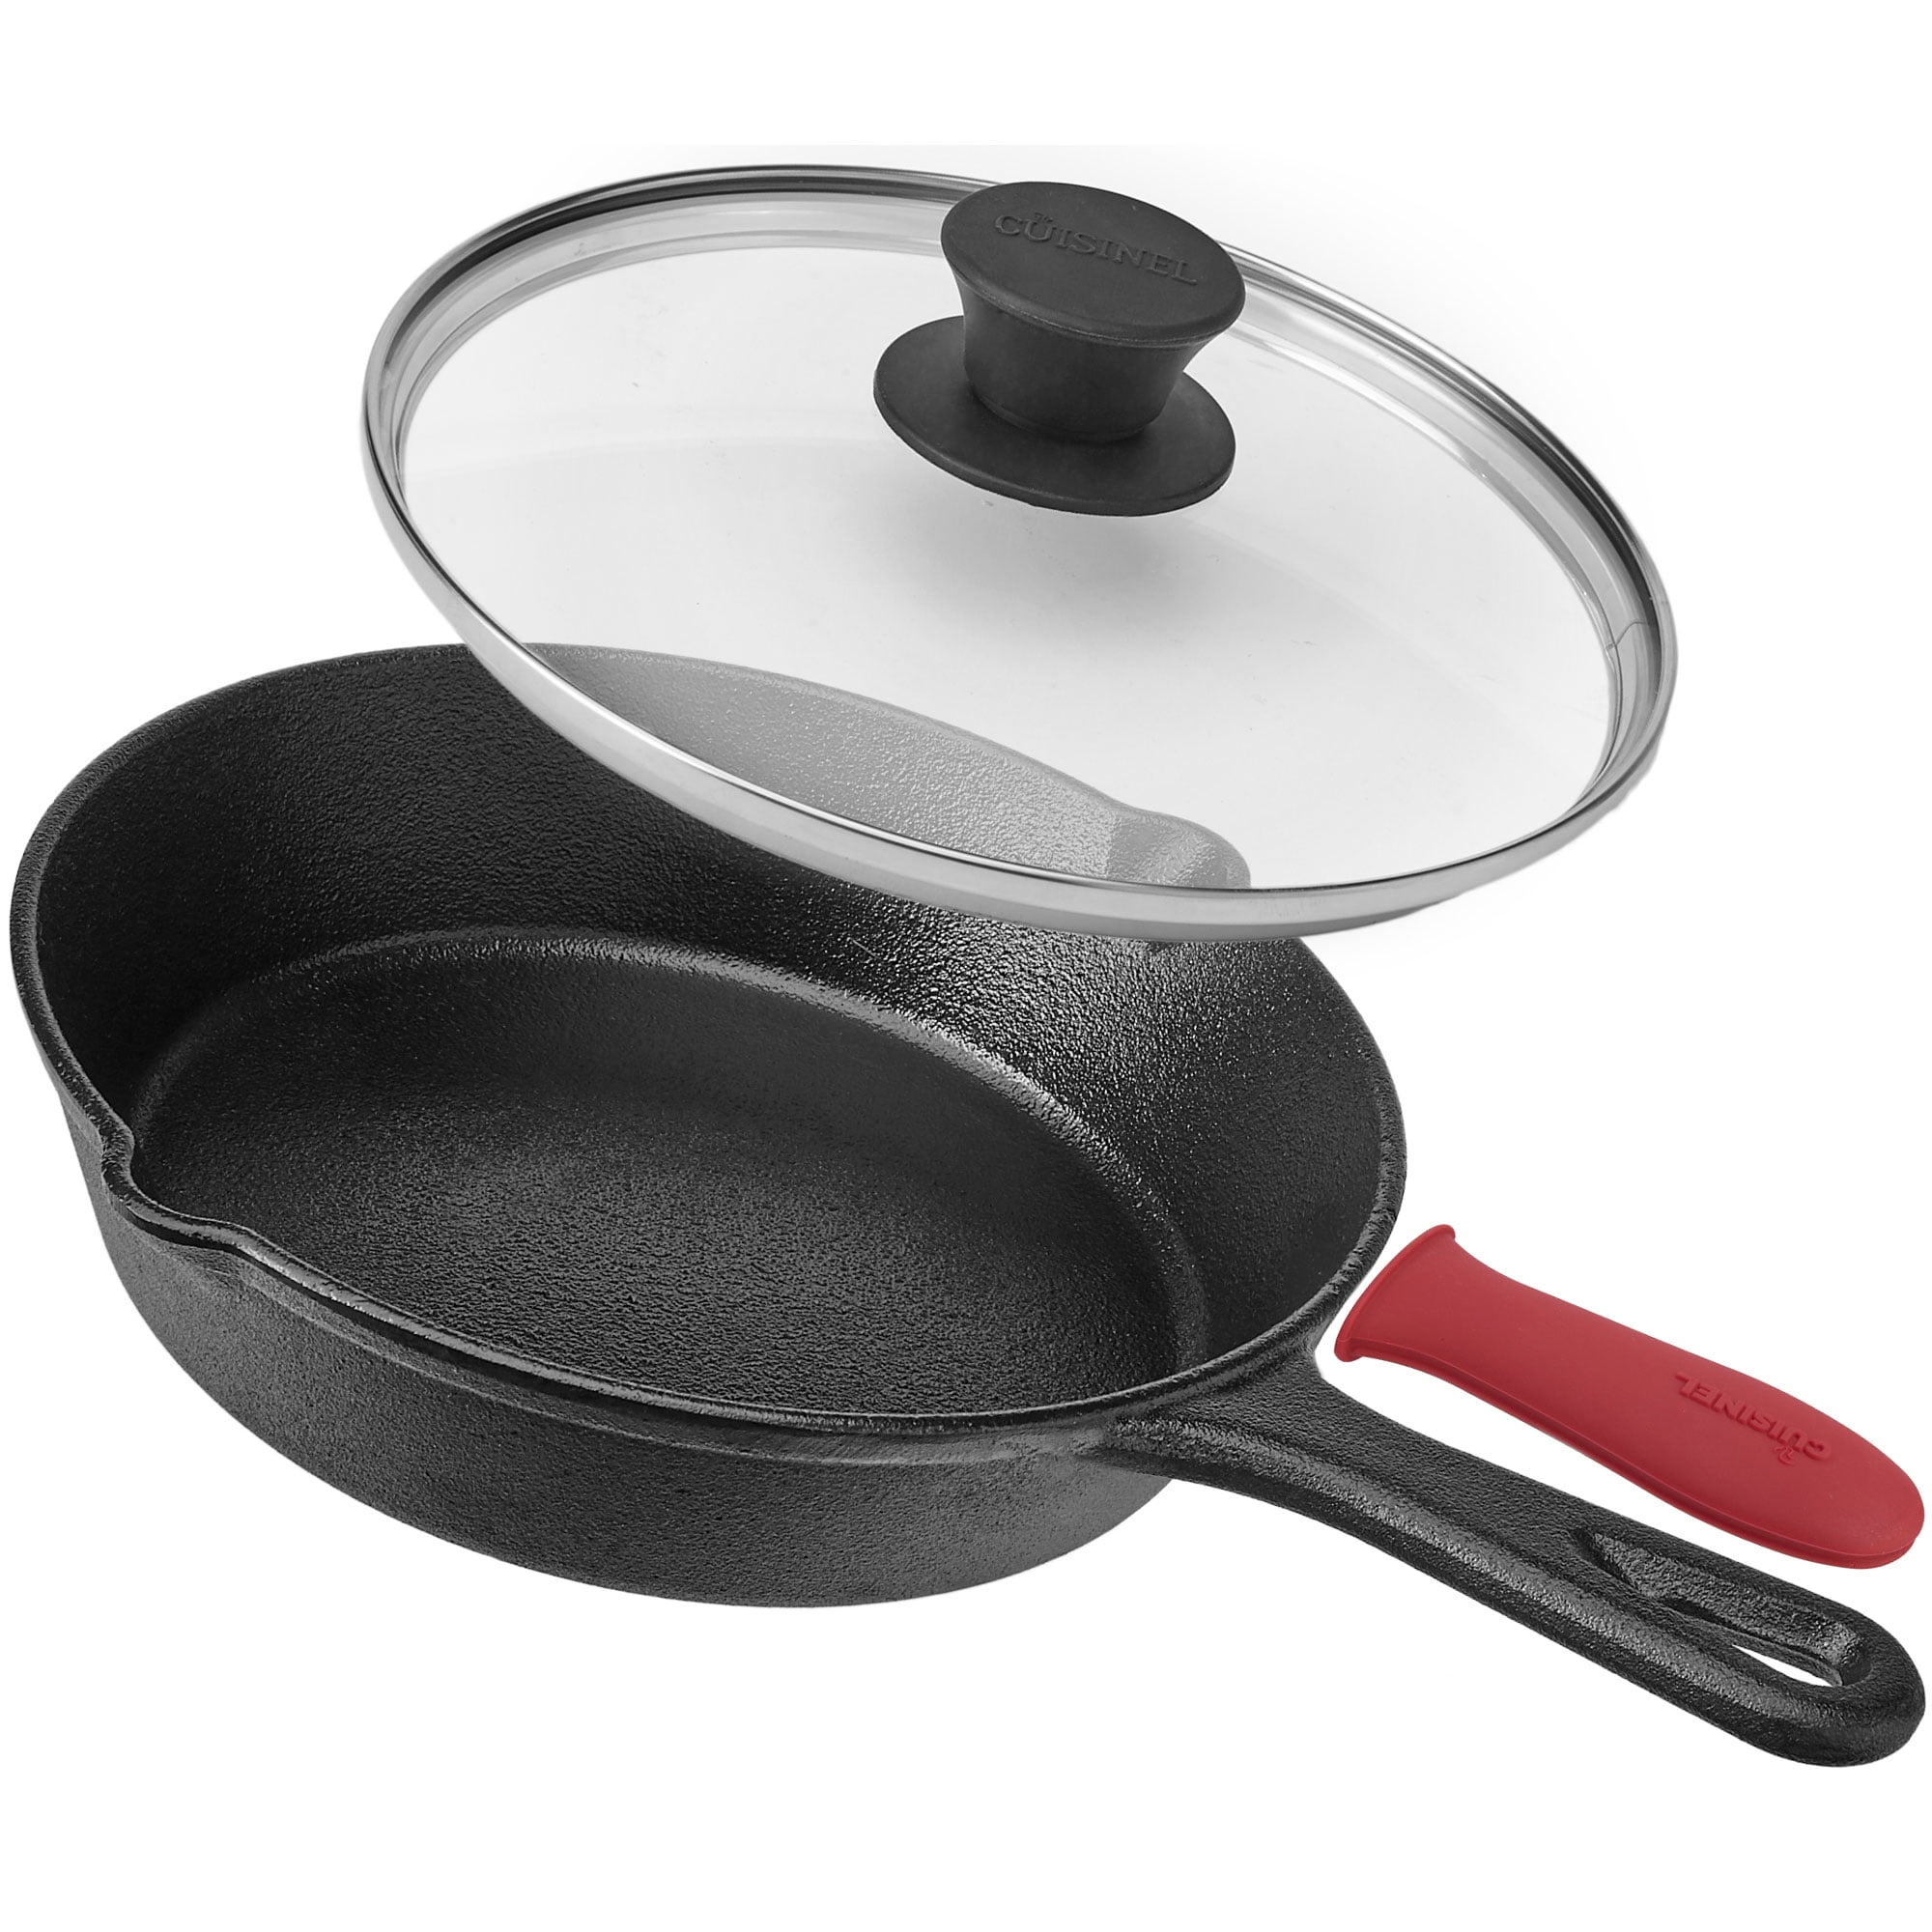 Cuisinel Cast Iron Skillet with Lid - 8-inch Pre-Seasoned Covered Frying  Pan Set + Silicone Handle and Lid Holders + Scraper/Cleaner 